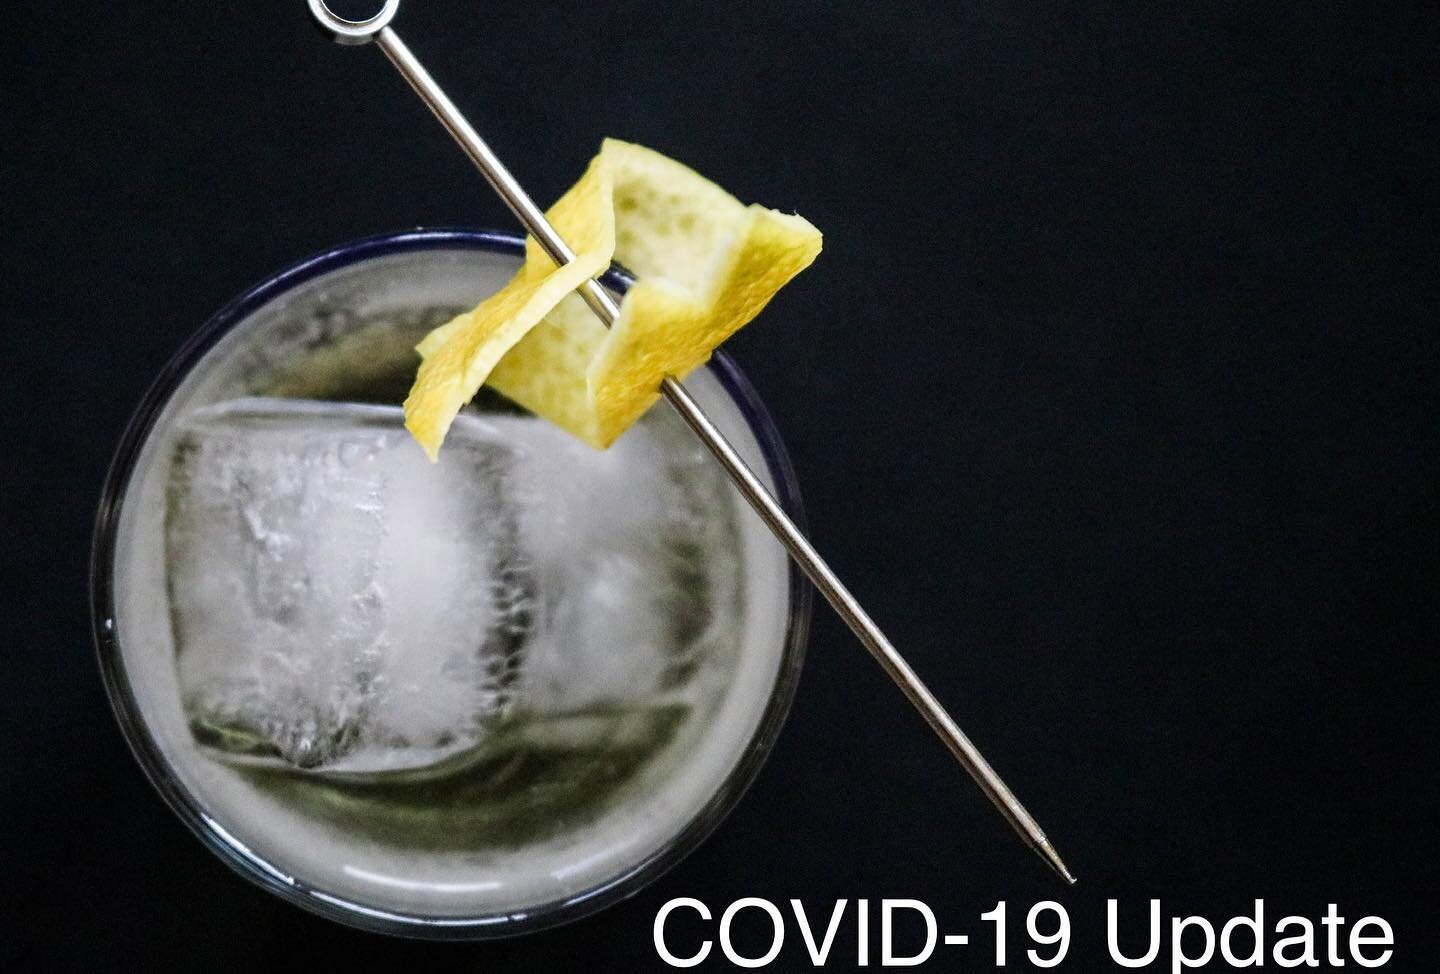 In light of the concerns of the Coronavirus disease (COVID-19), Mint Bar would like to reassure our clients and guests that plans and preventive measure are being implemented to best protect your event.

To ensure we continue to provide a seamless ex